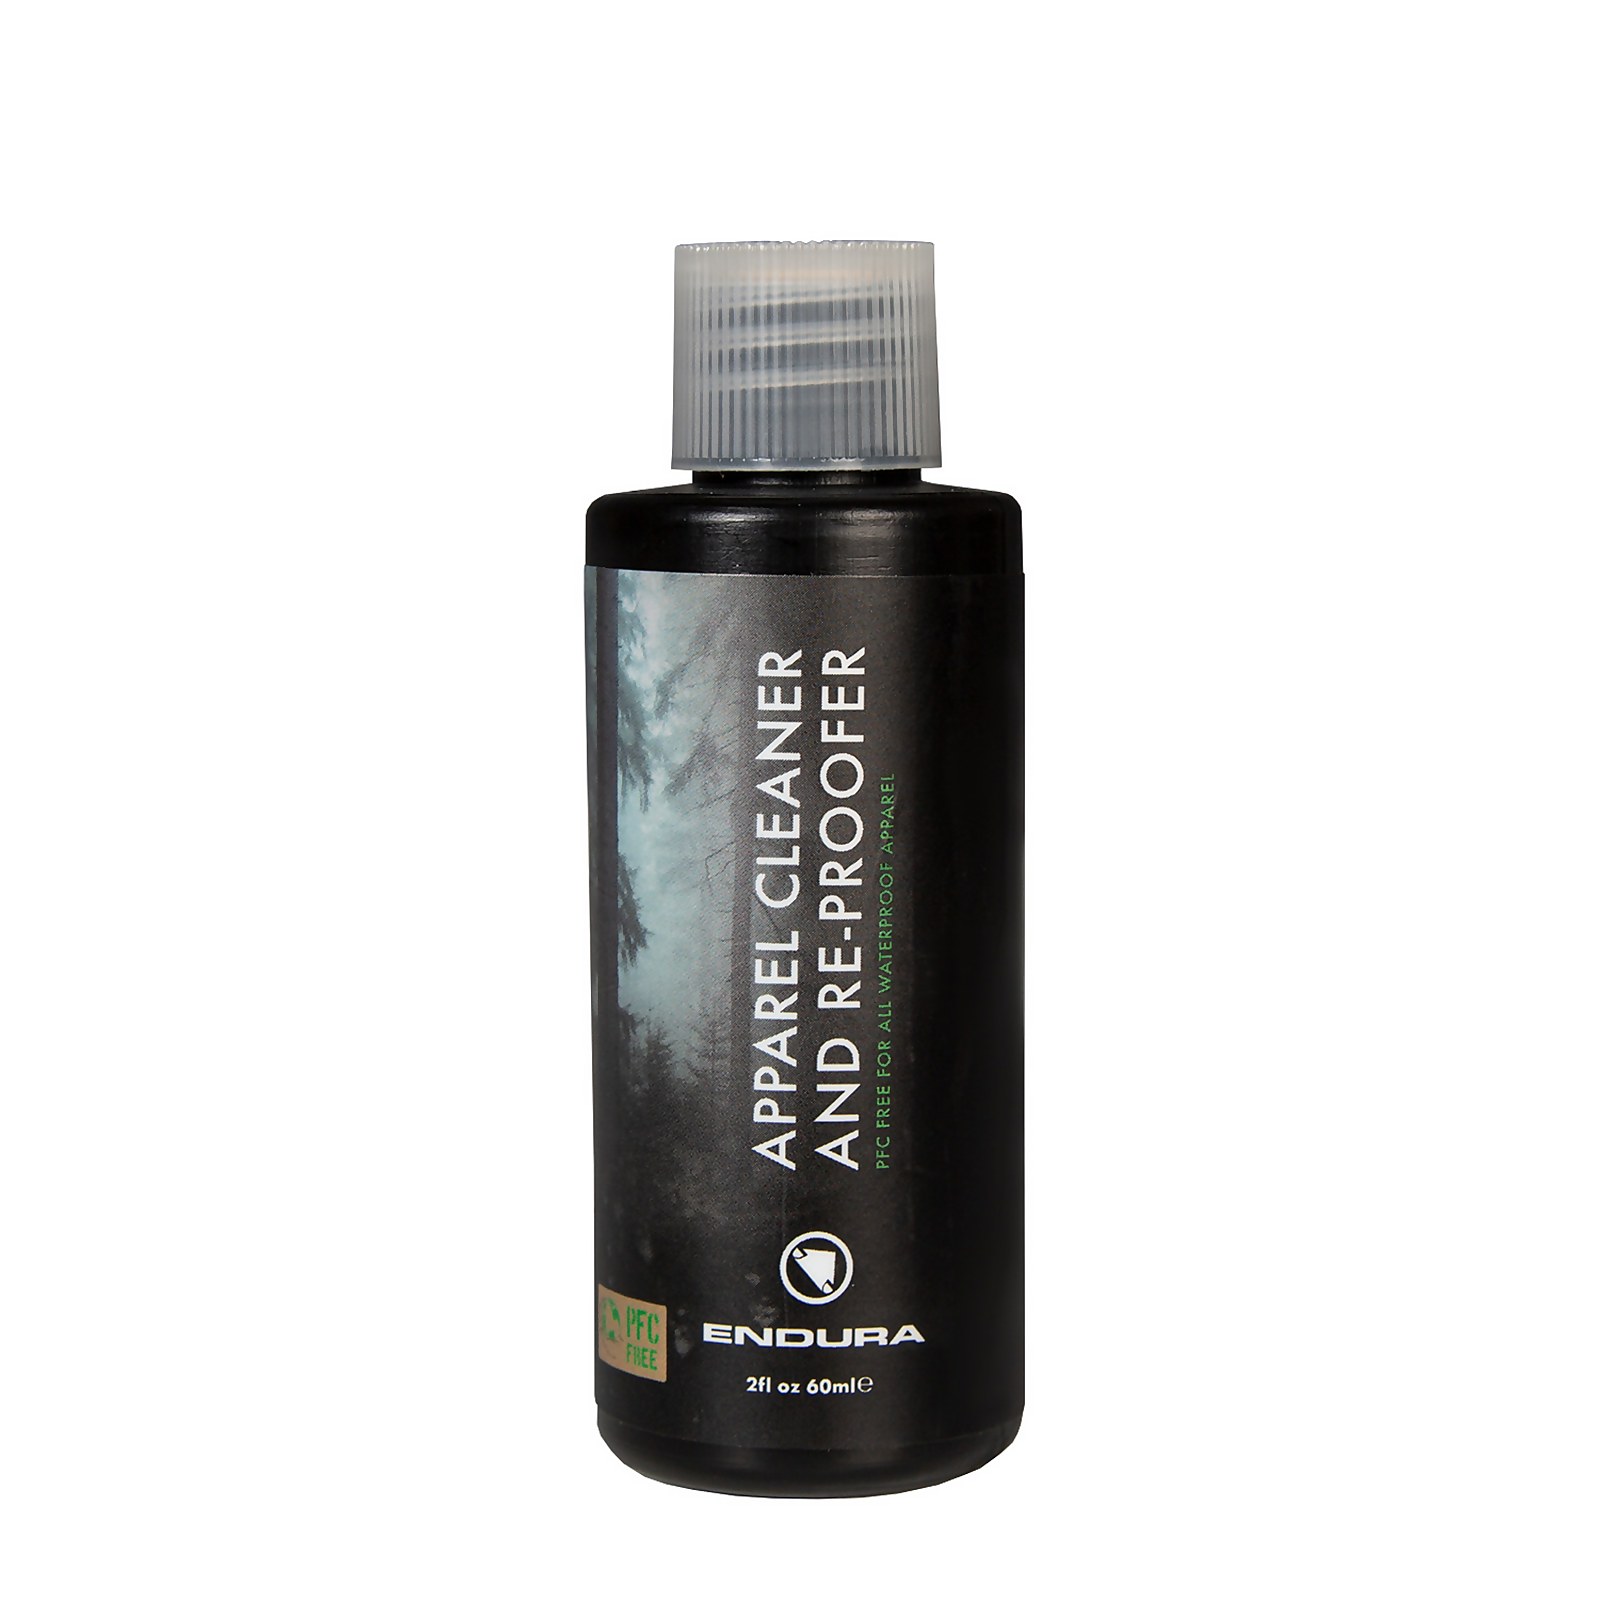 Endura Men's Apparel Cleaner and Re-proofer 60ml - Clear